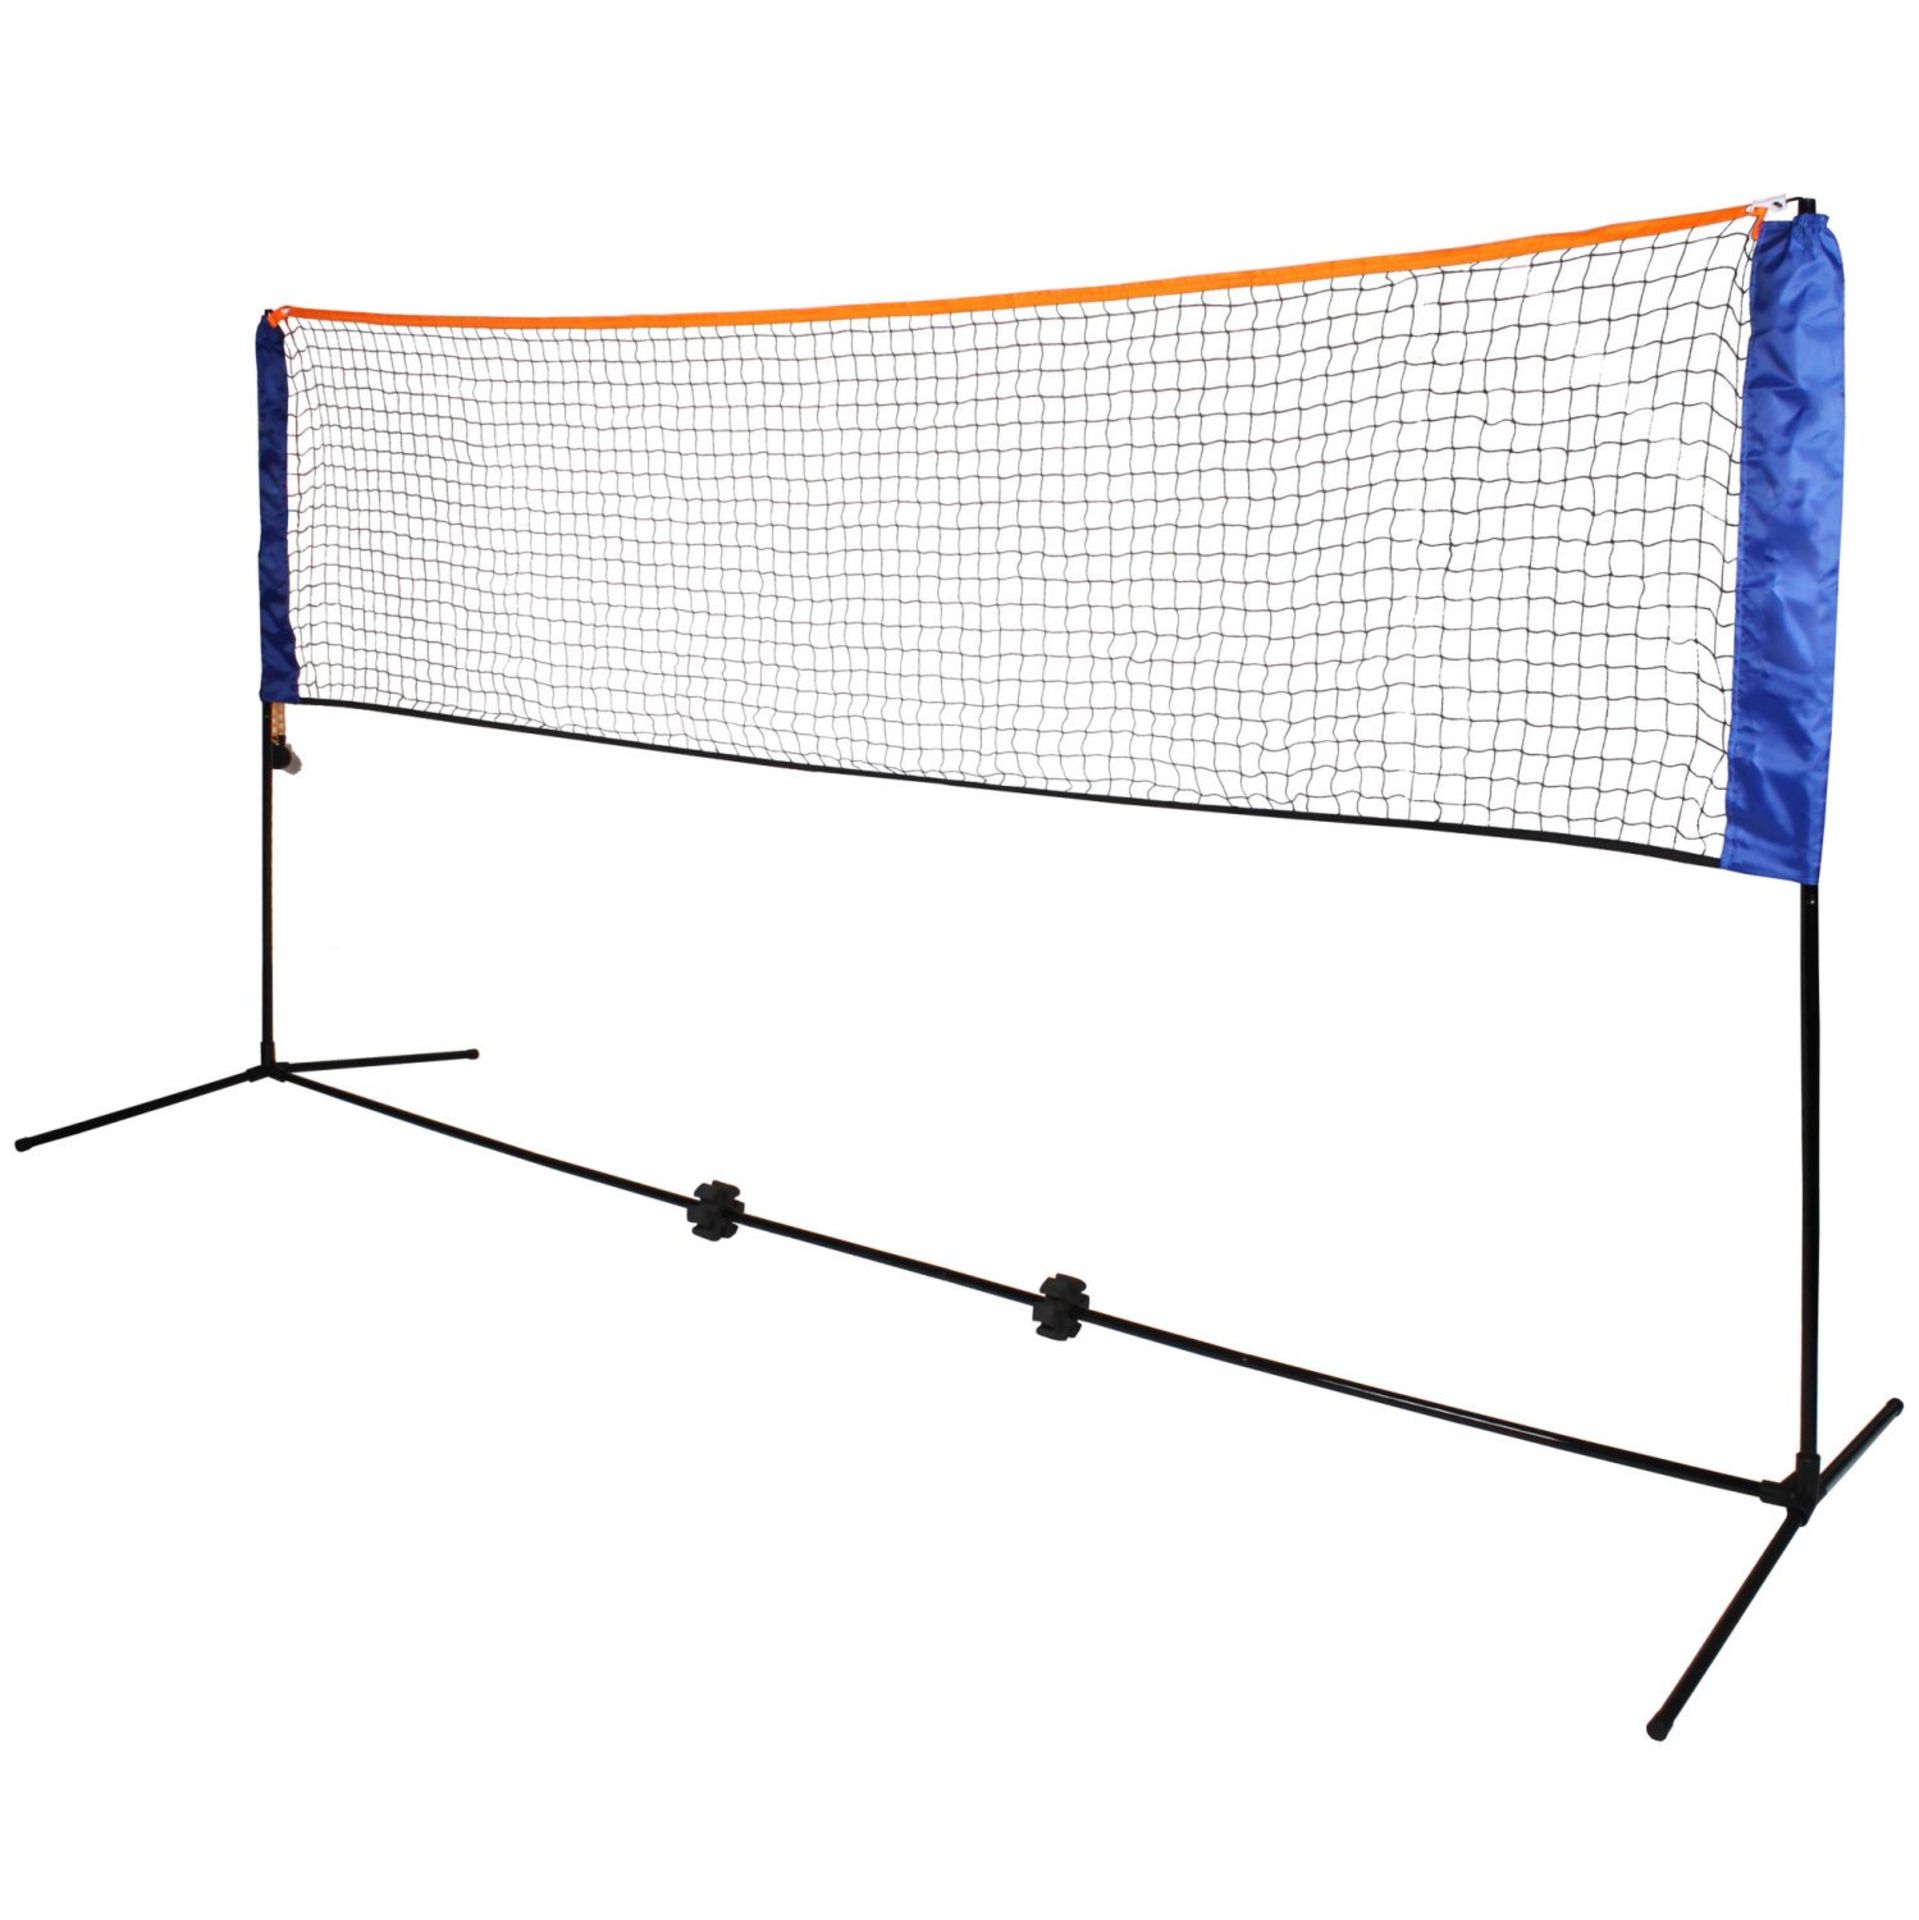 (G12) Large 5m Adjustable Foldable Badminton Tennis Volleyball Net Easy Fold Out Assmbly - F...